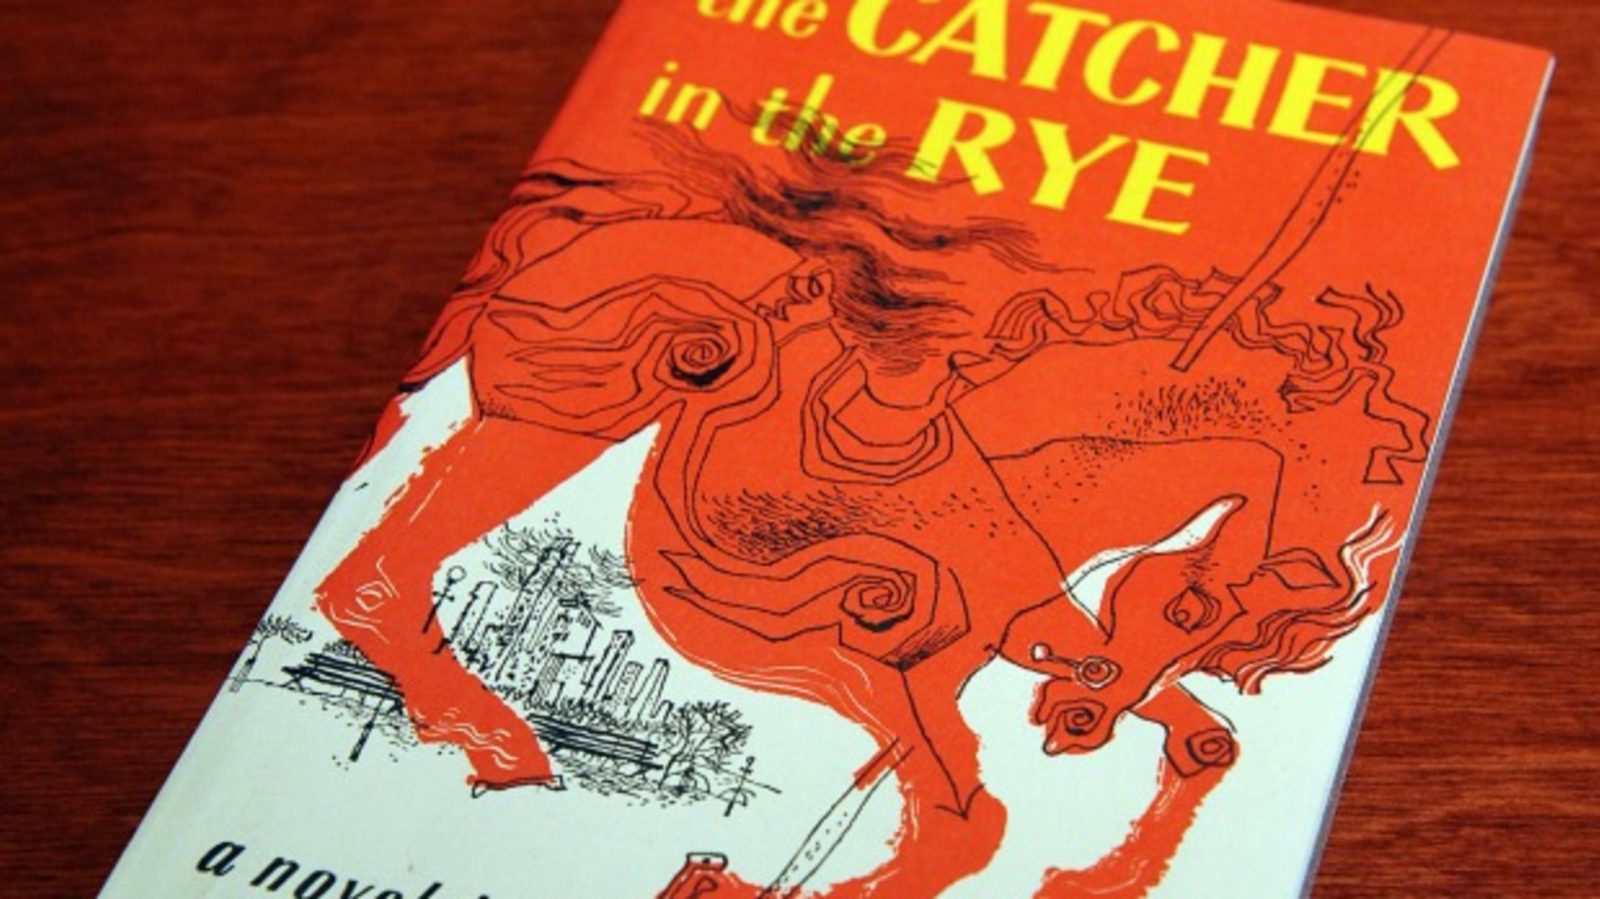 Do You Have as Much General Knowledge as You Think You Do? Catcher in the Rye